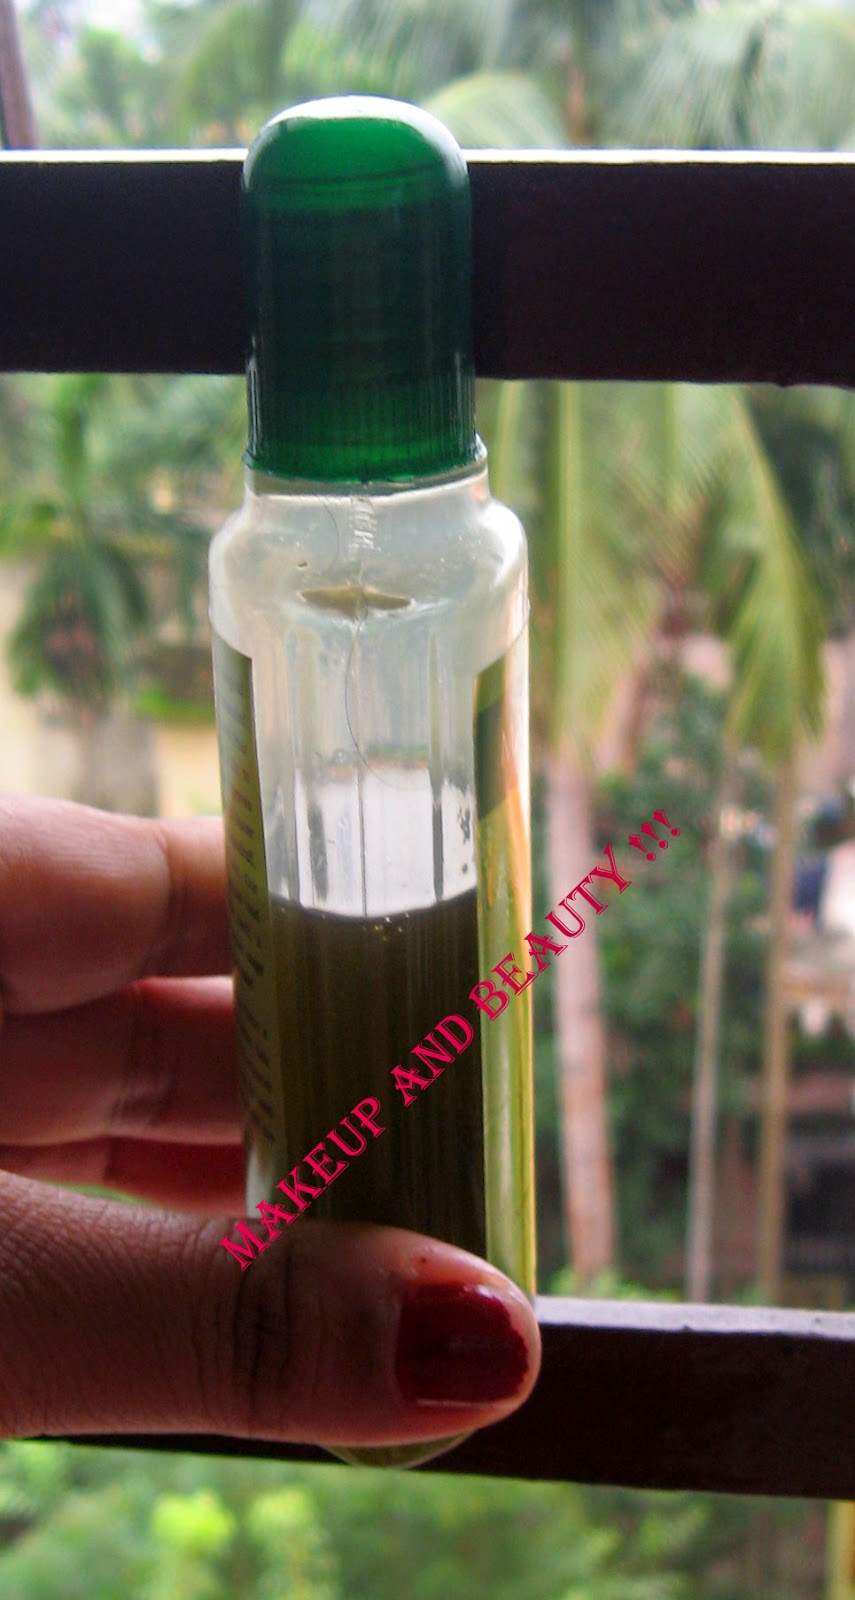 Makeup and beauty !!!: Review of MABH Herbals hair growth oil:-